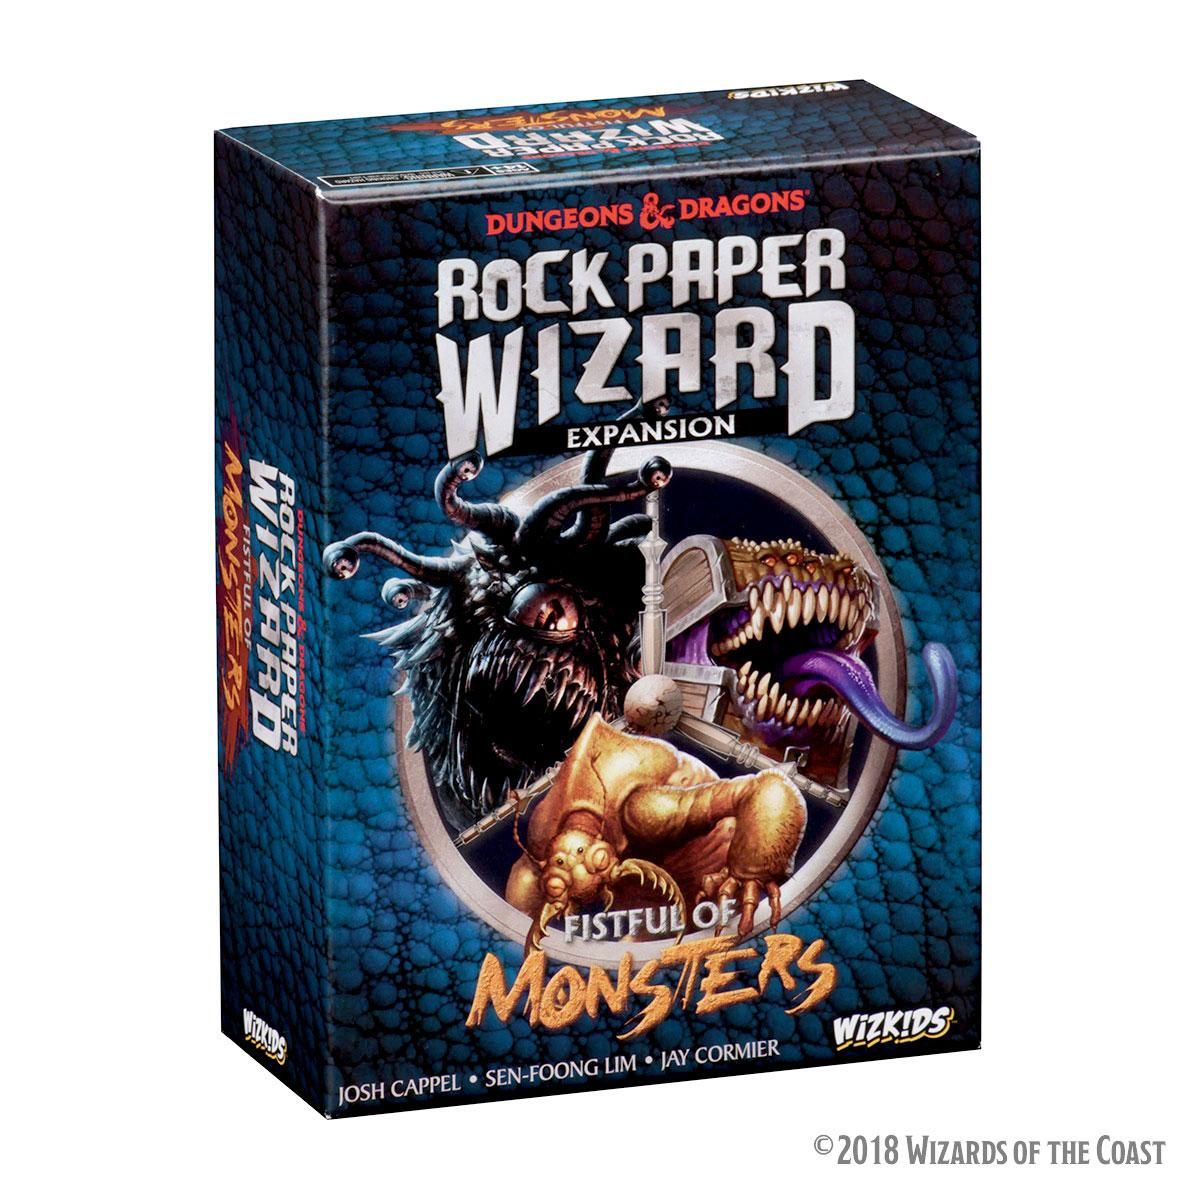 Dungeons & Dragons Board Game Expansion Rock Paper Wizard: Fistful of Monsters Anglická Verze Wizkids